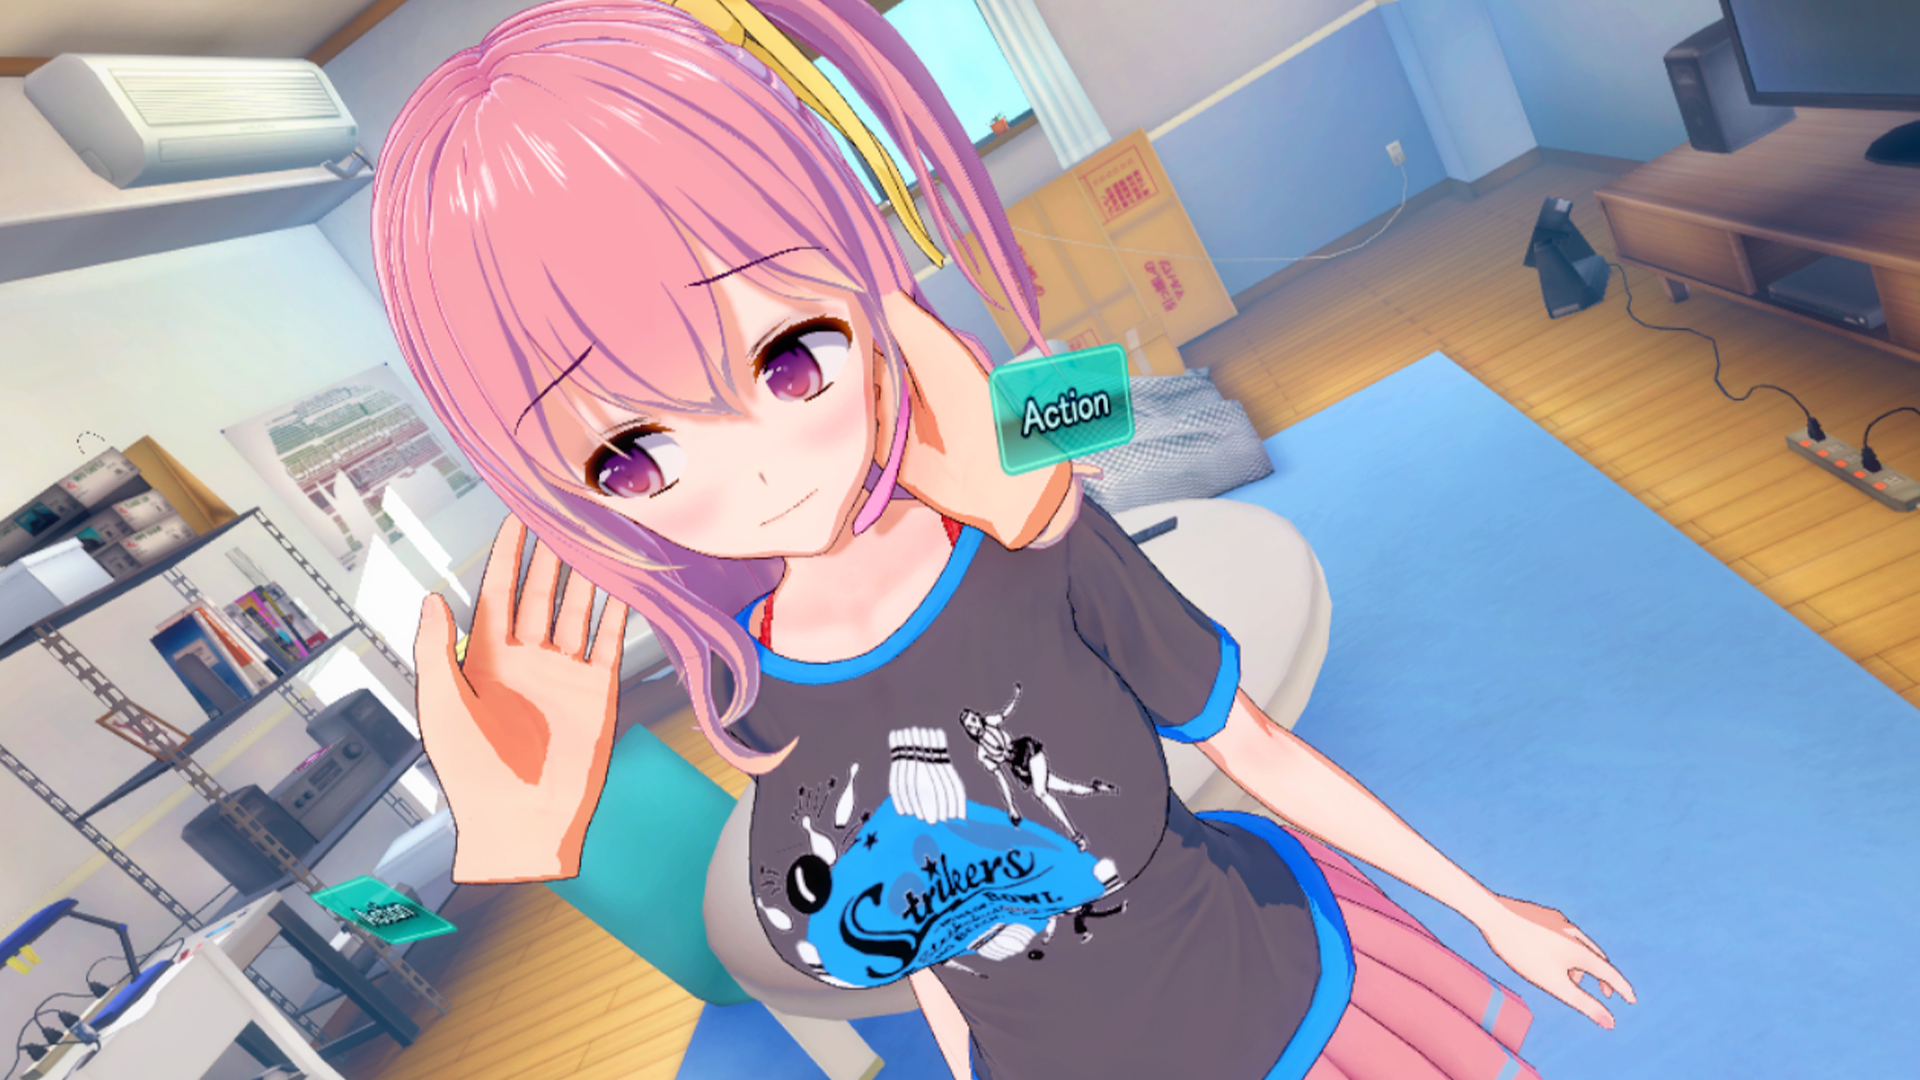 Cartoon Porn 3d Game Girls - This game has you build an anime girl to have sex with, and it's a Steam  bestseller | PCGamesN